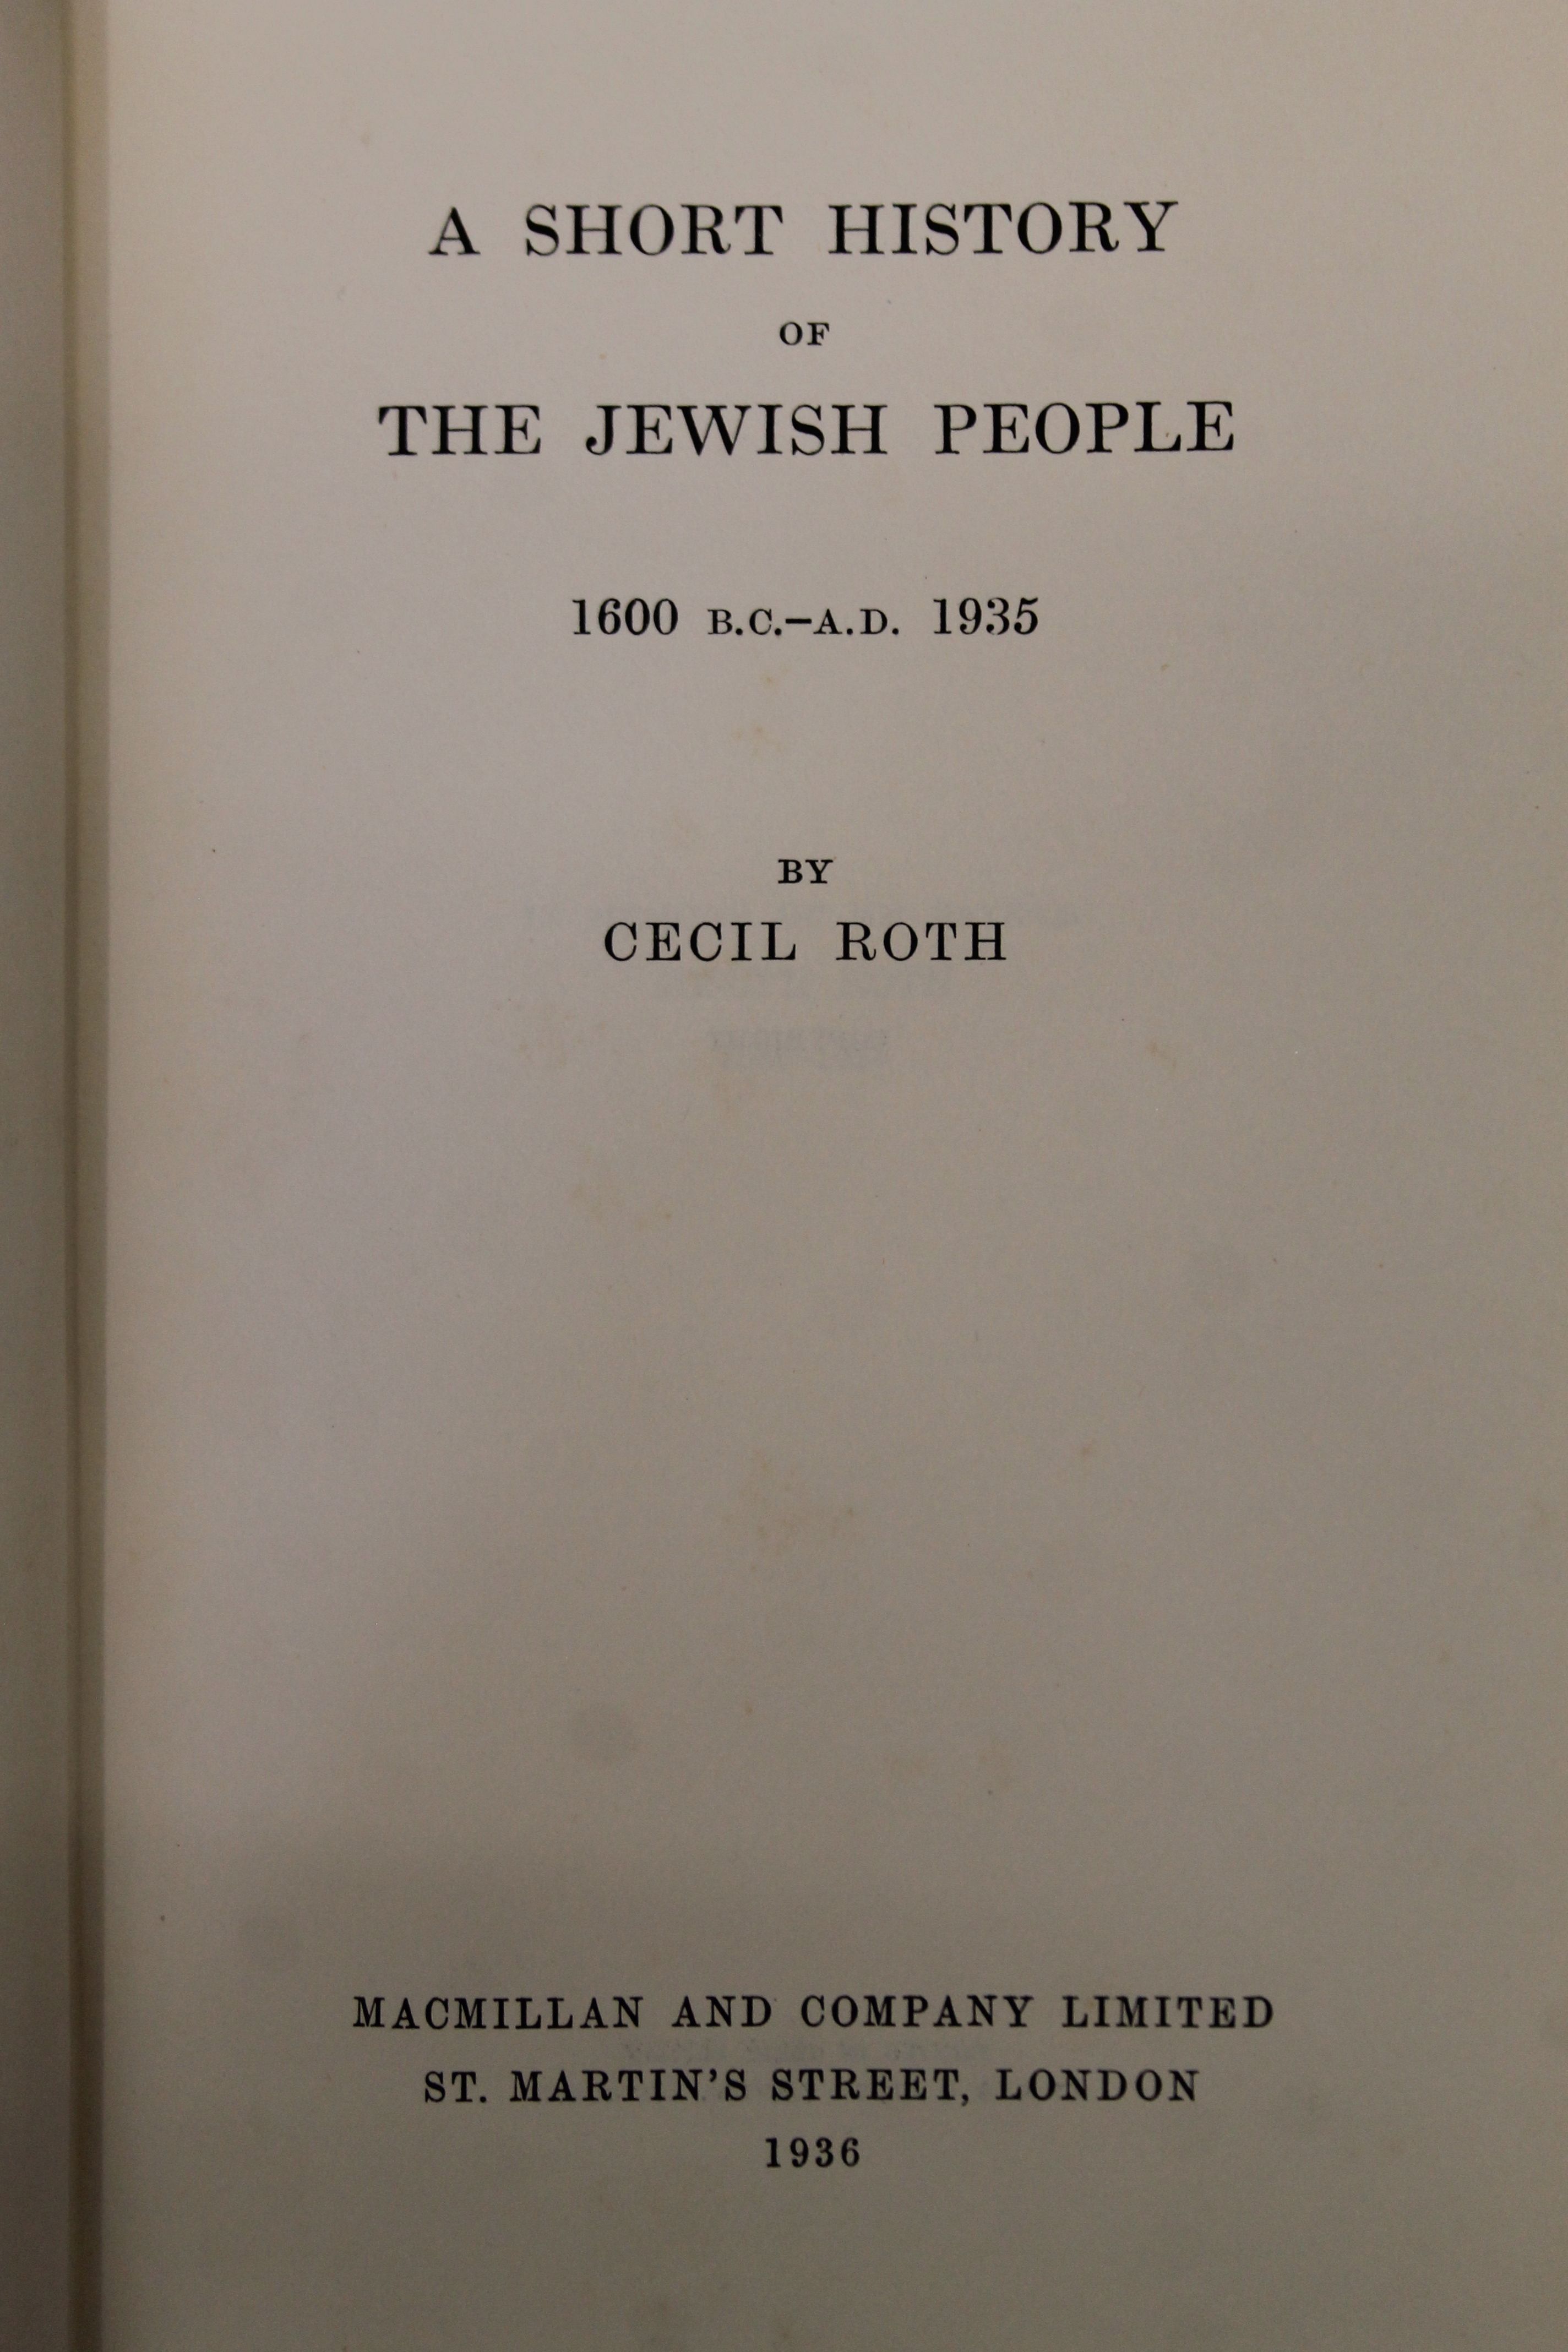 Jewish Opinion, The Bulletin of the League of Jews, 1919; and nine other Jewish titles. - Image 13 of 42